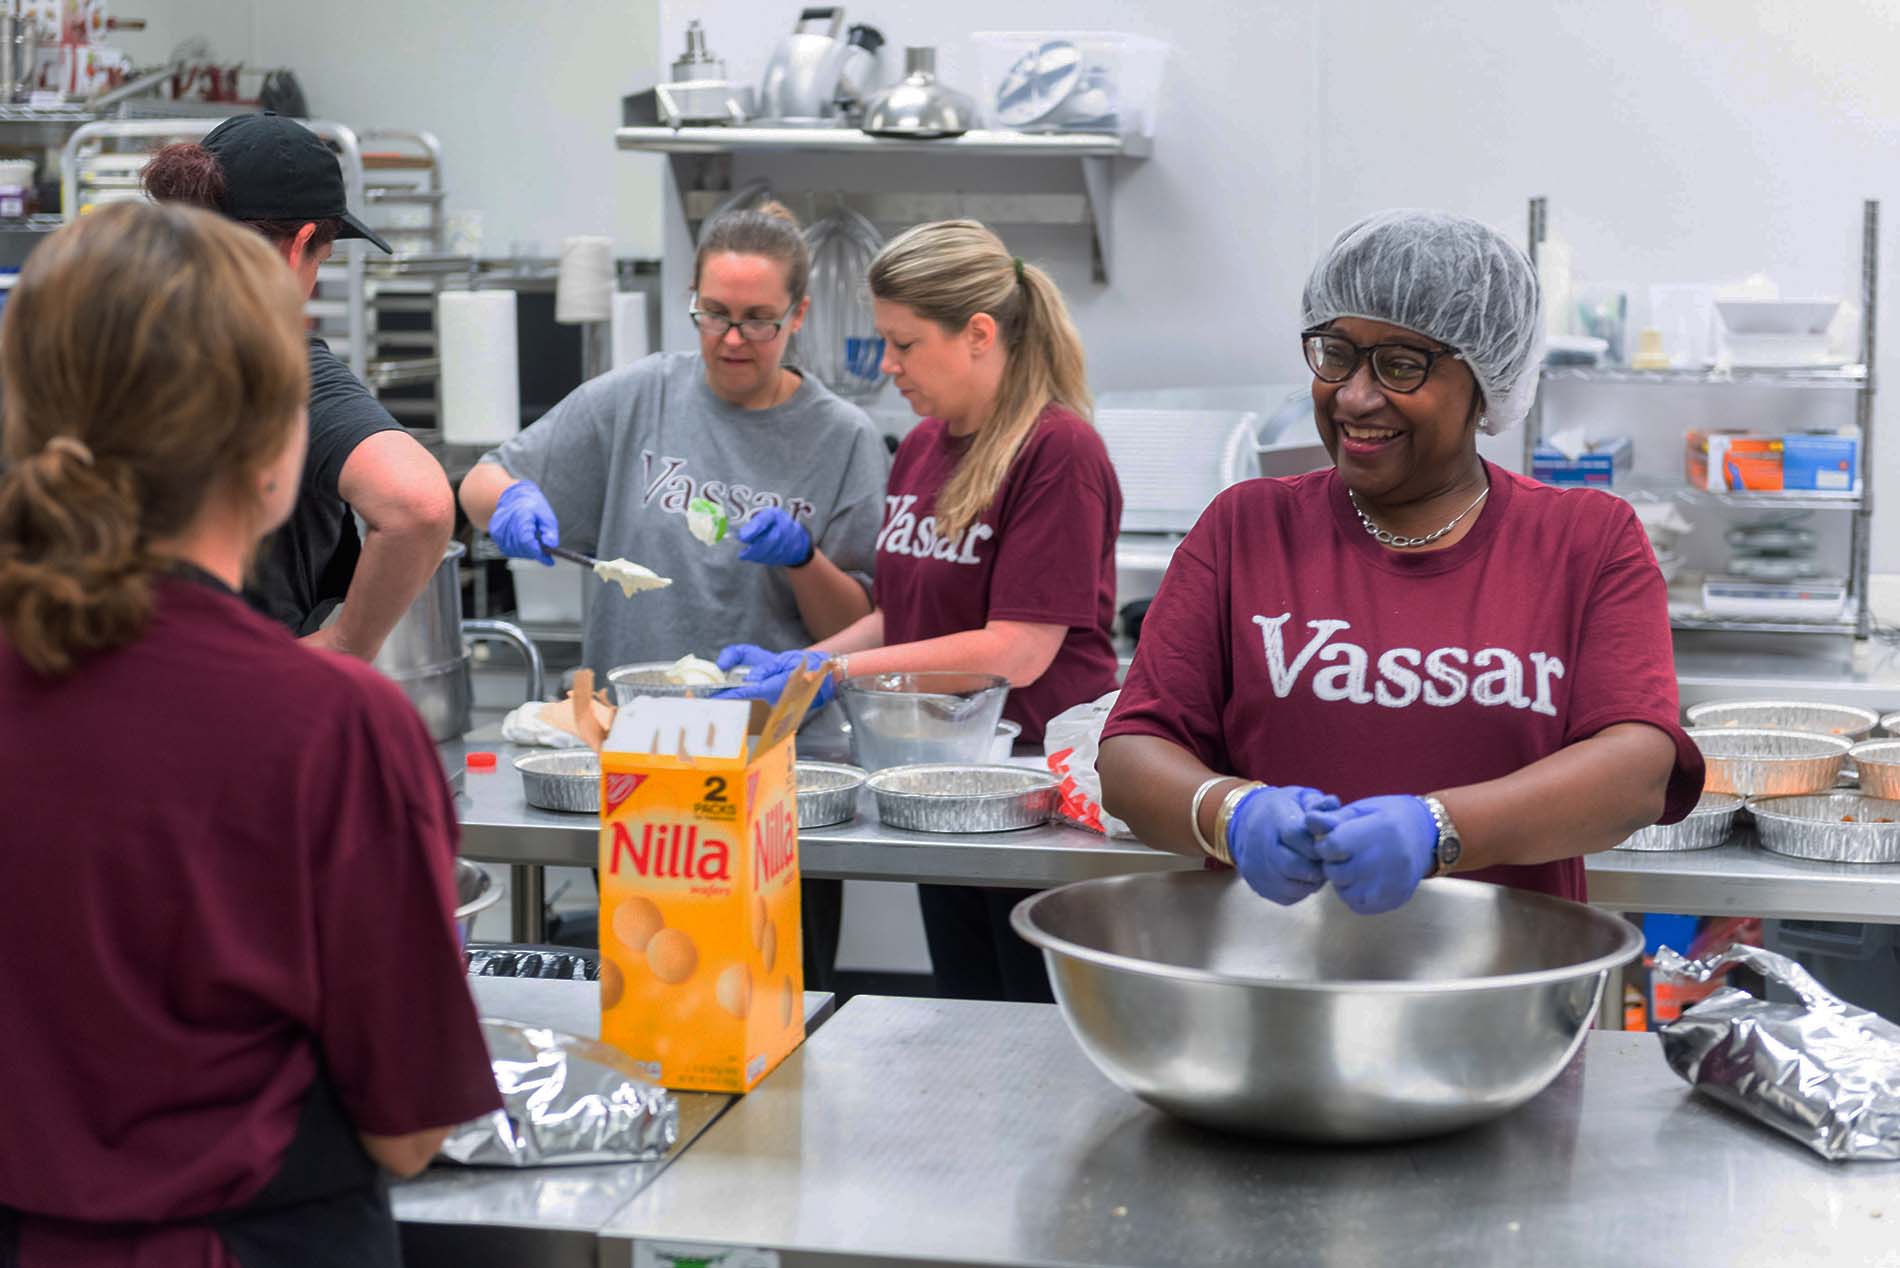 A group of Vassar volunteers food prepping in the Sparrow’s Nest kitchen for families impacted by cancer.